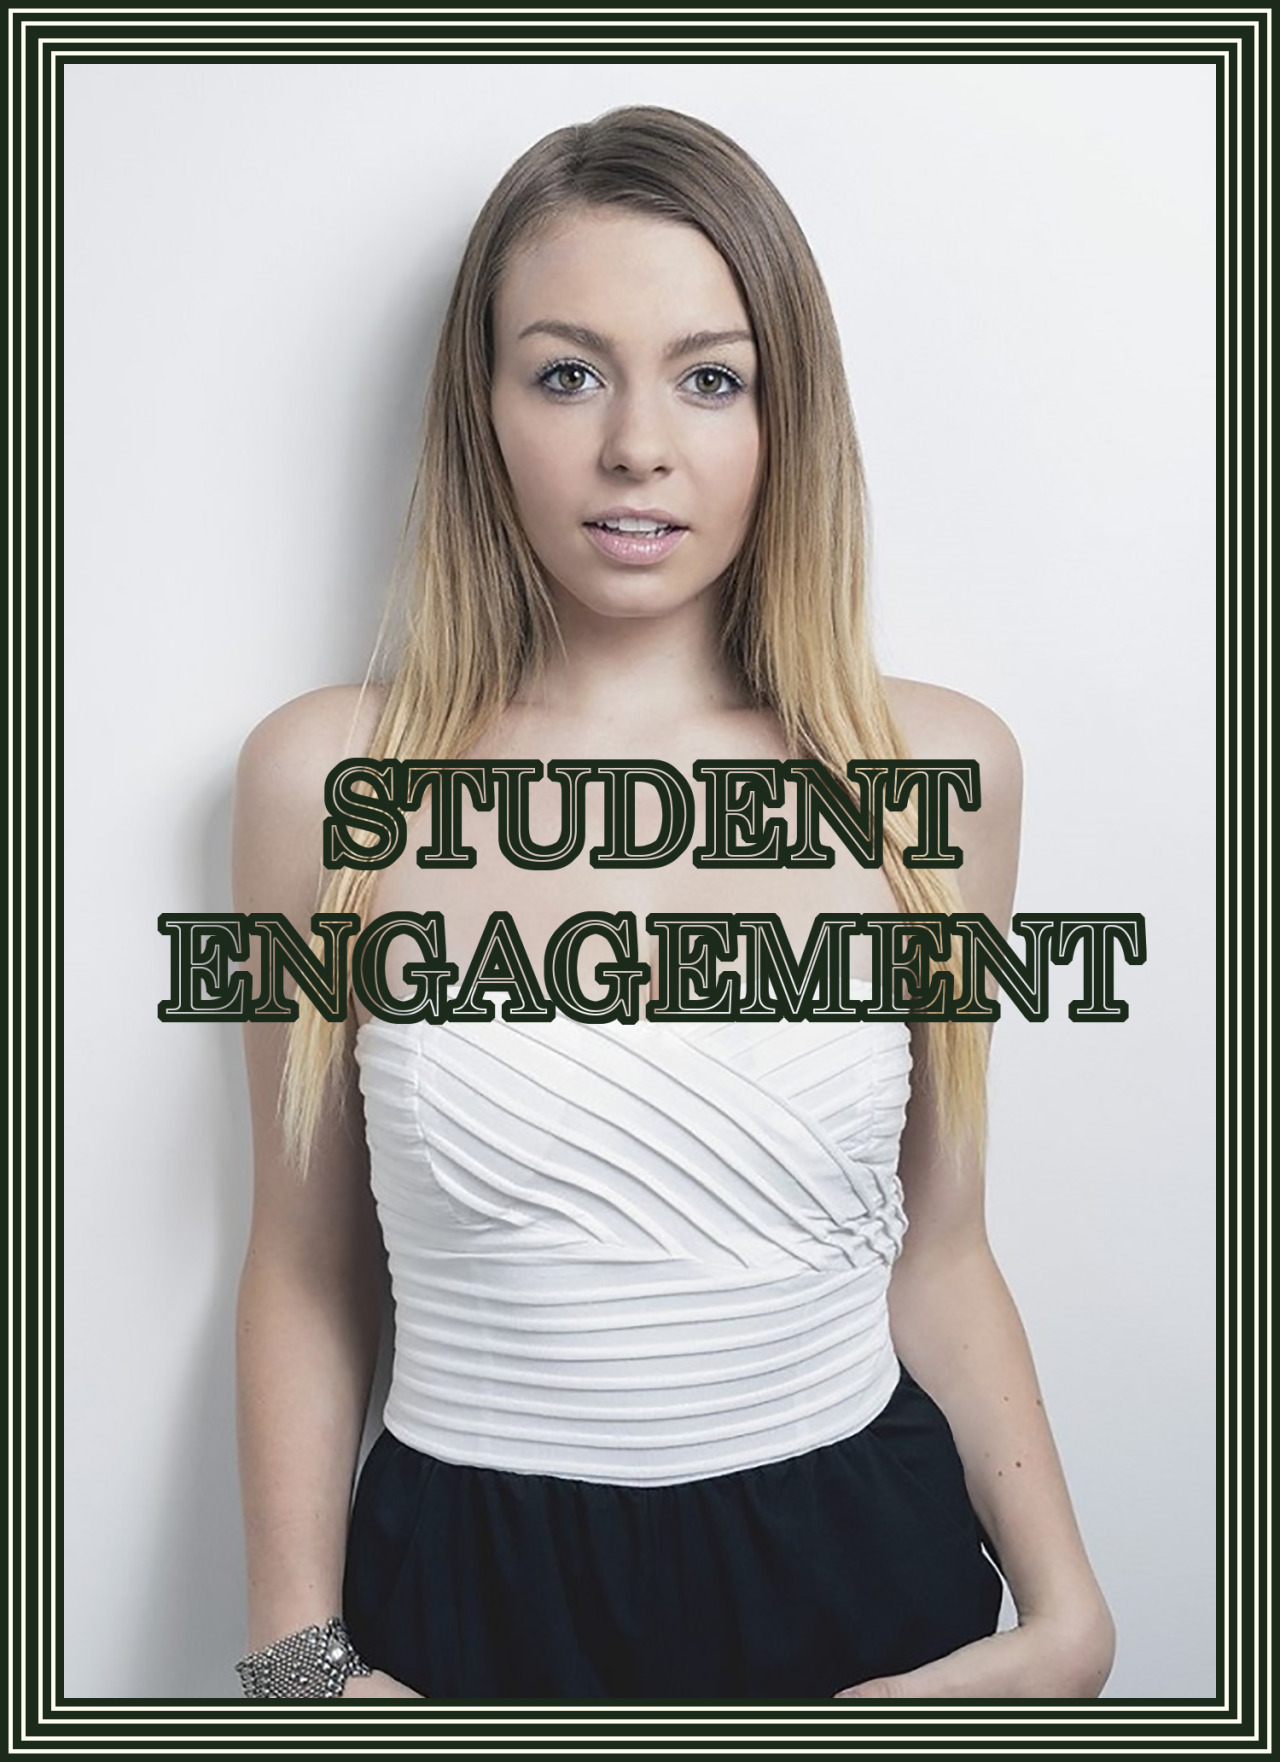   Today, I released a brand new caption story called &ldquo;Student Engagement&rdquo;.